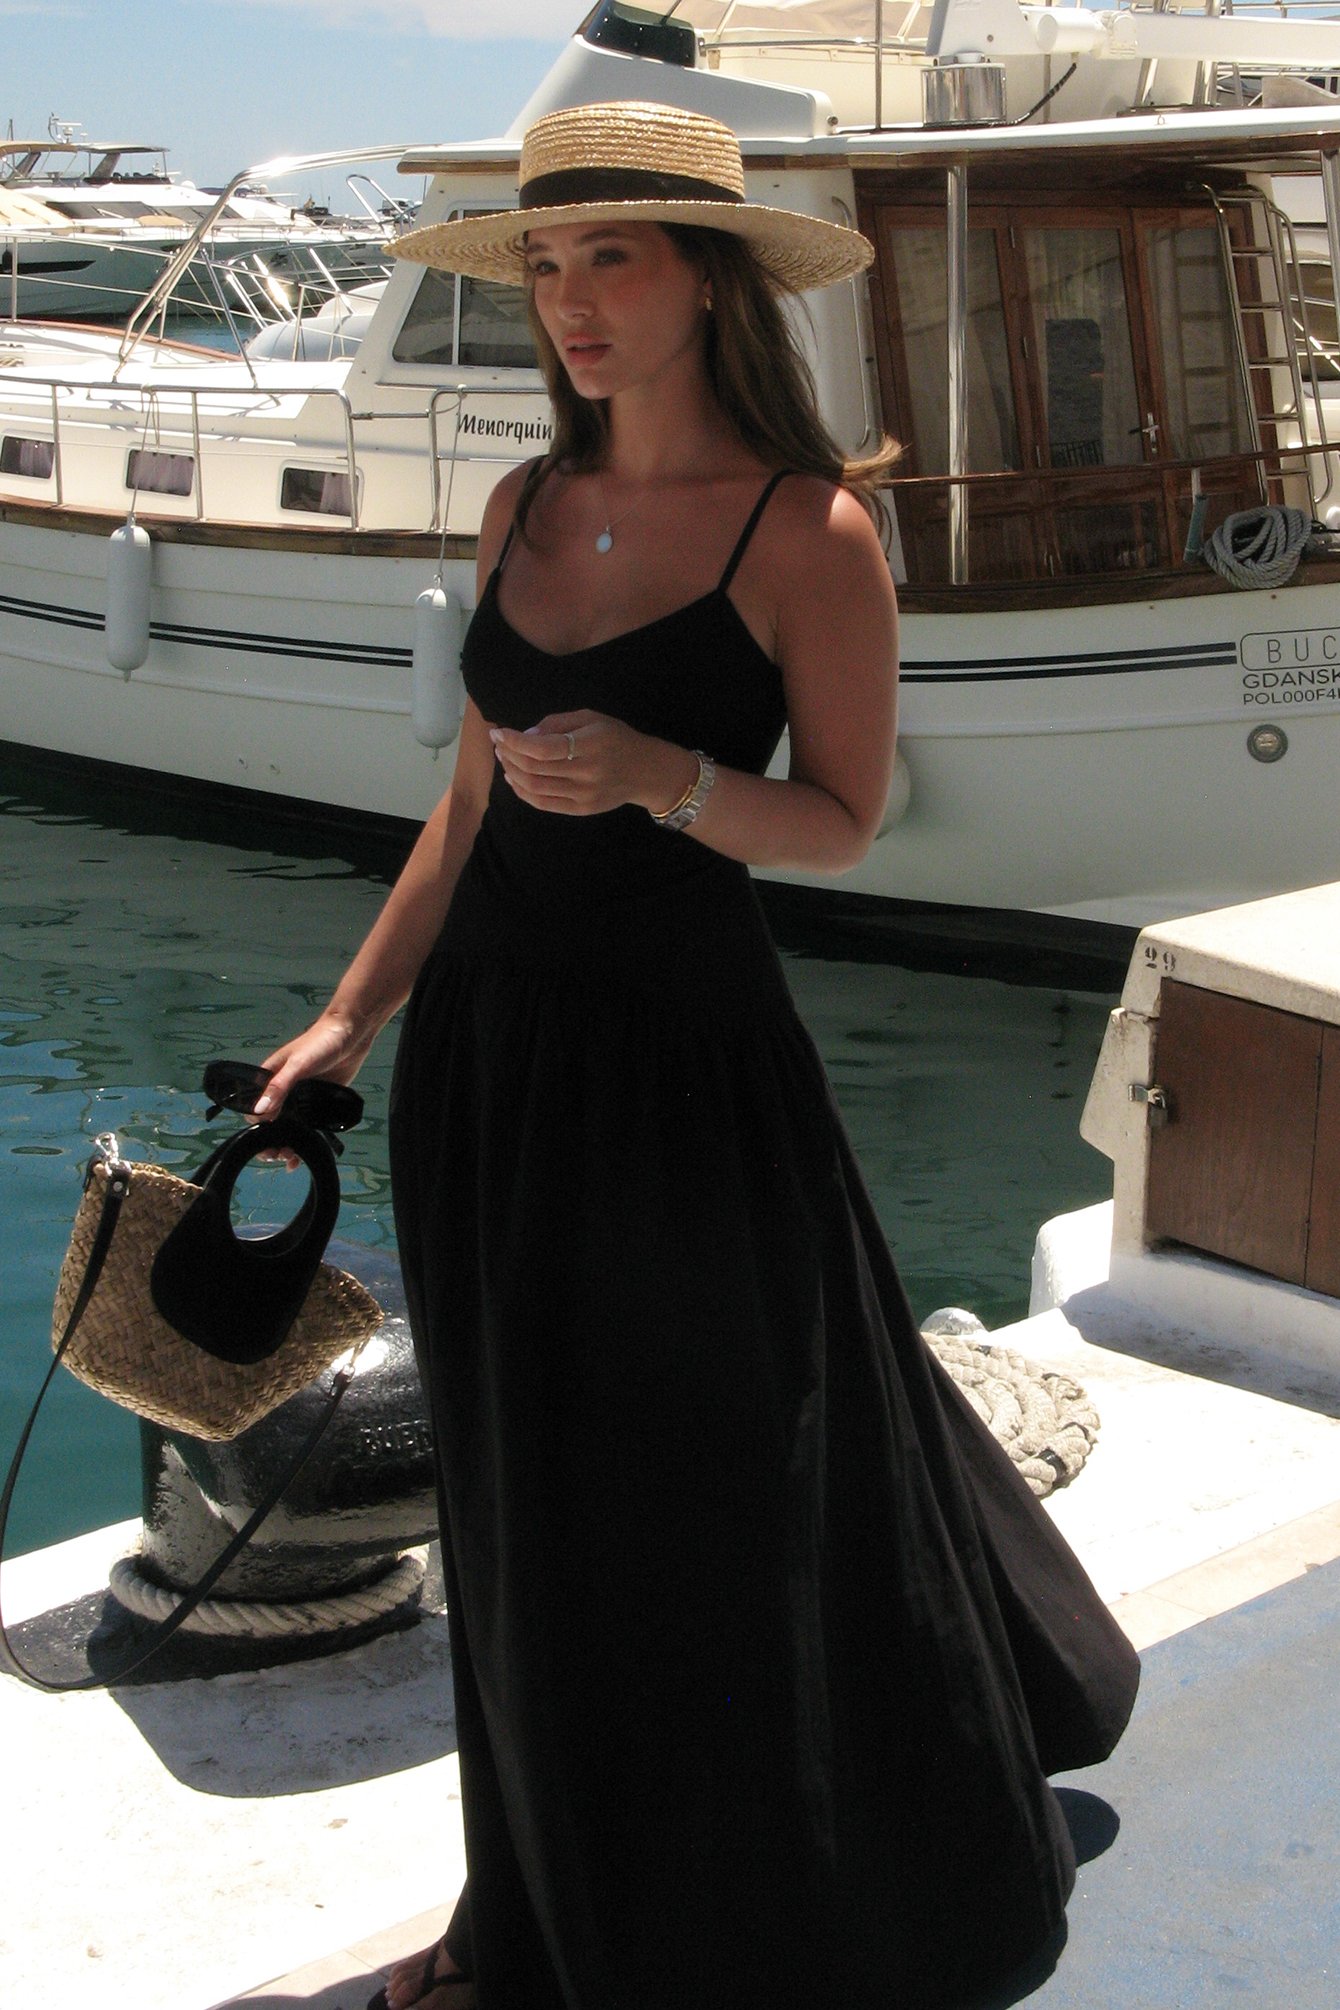 My Newest go-to Black Summer Maxi